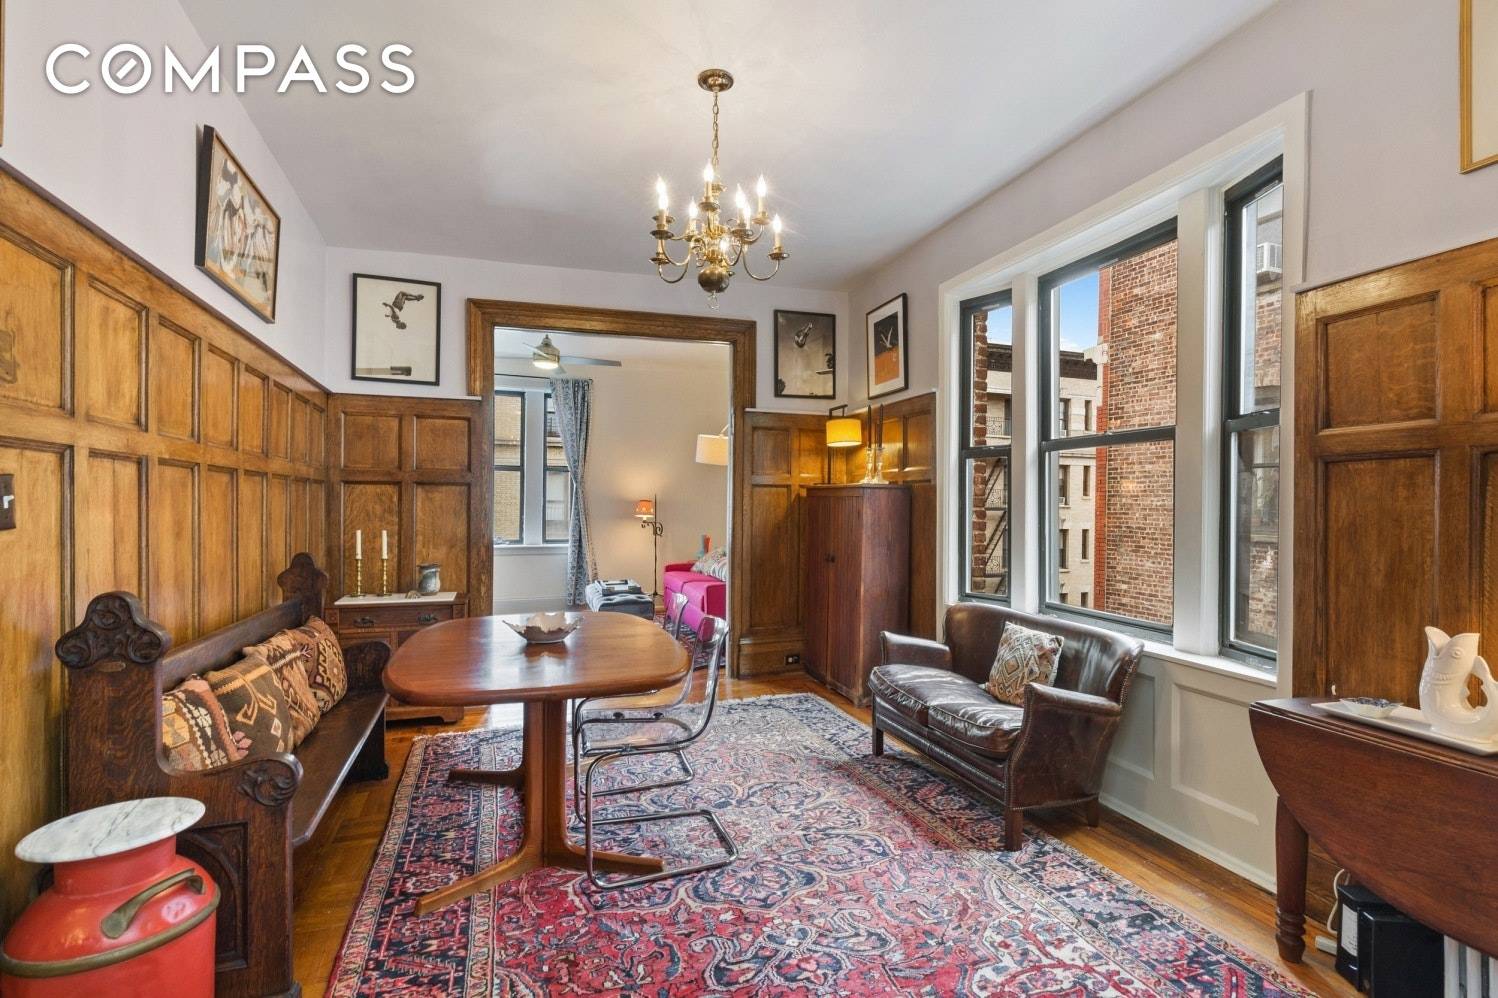 THE BEST OF BOTH WORLDS Rich, glorious prewar charm and fresh modern finishes live in perfect harmony here in this 4 room convertible 2 bedroom home.